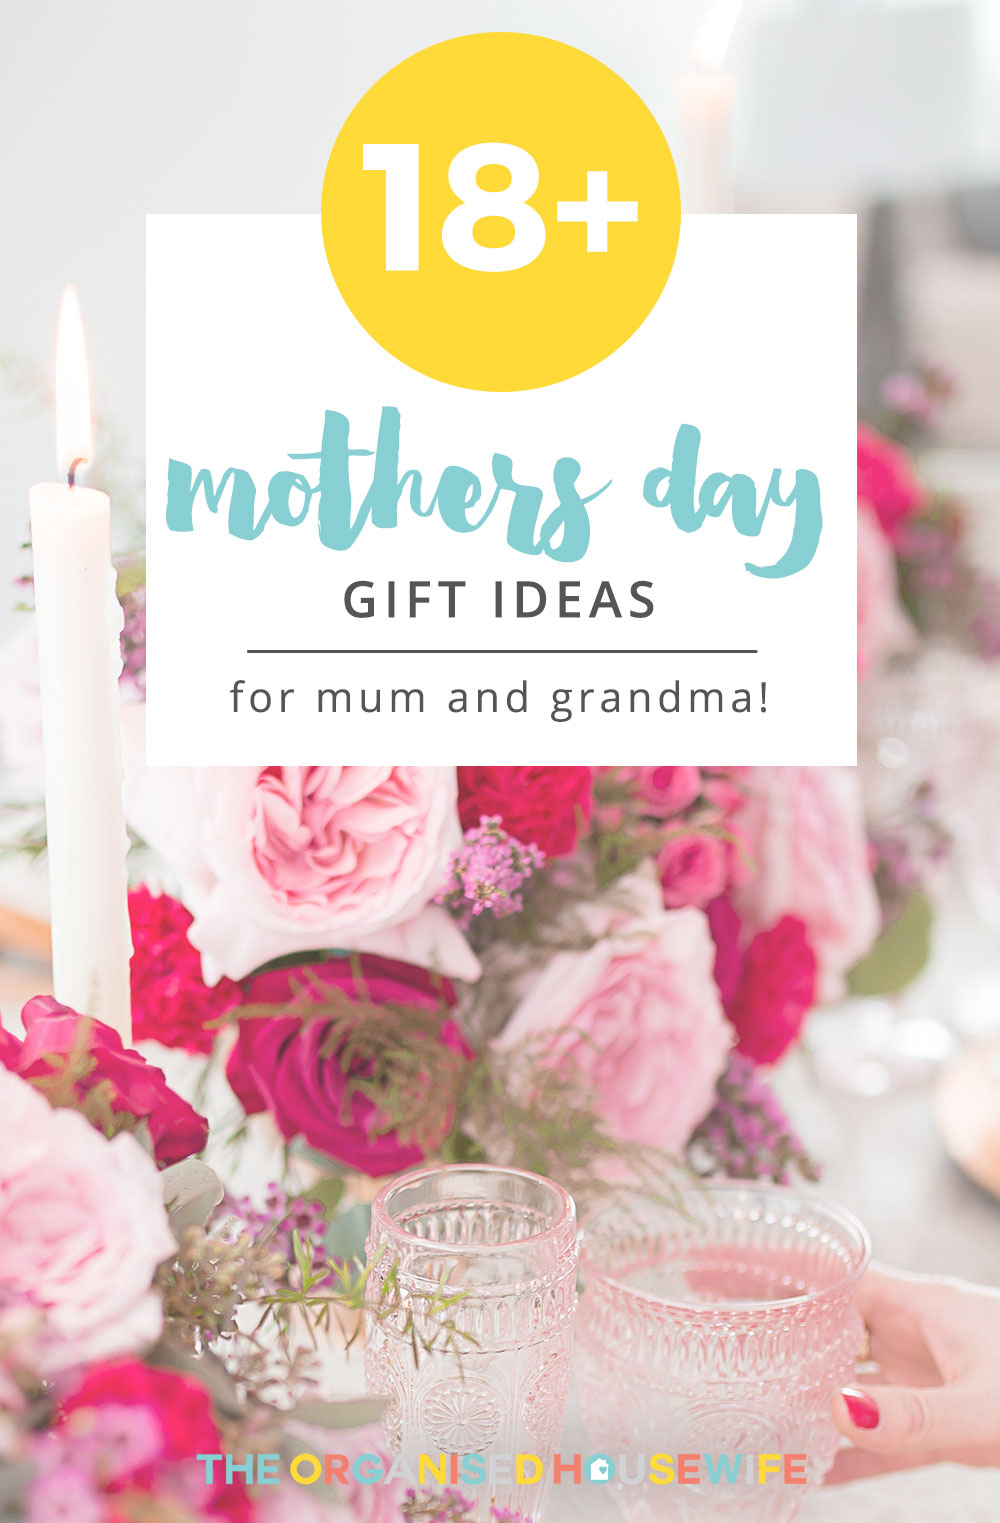 2017 MOTHER'S DAY GIFT GUIDE - The Organised Housewife